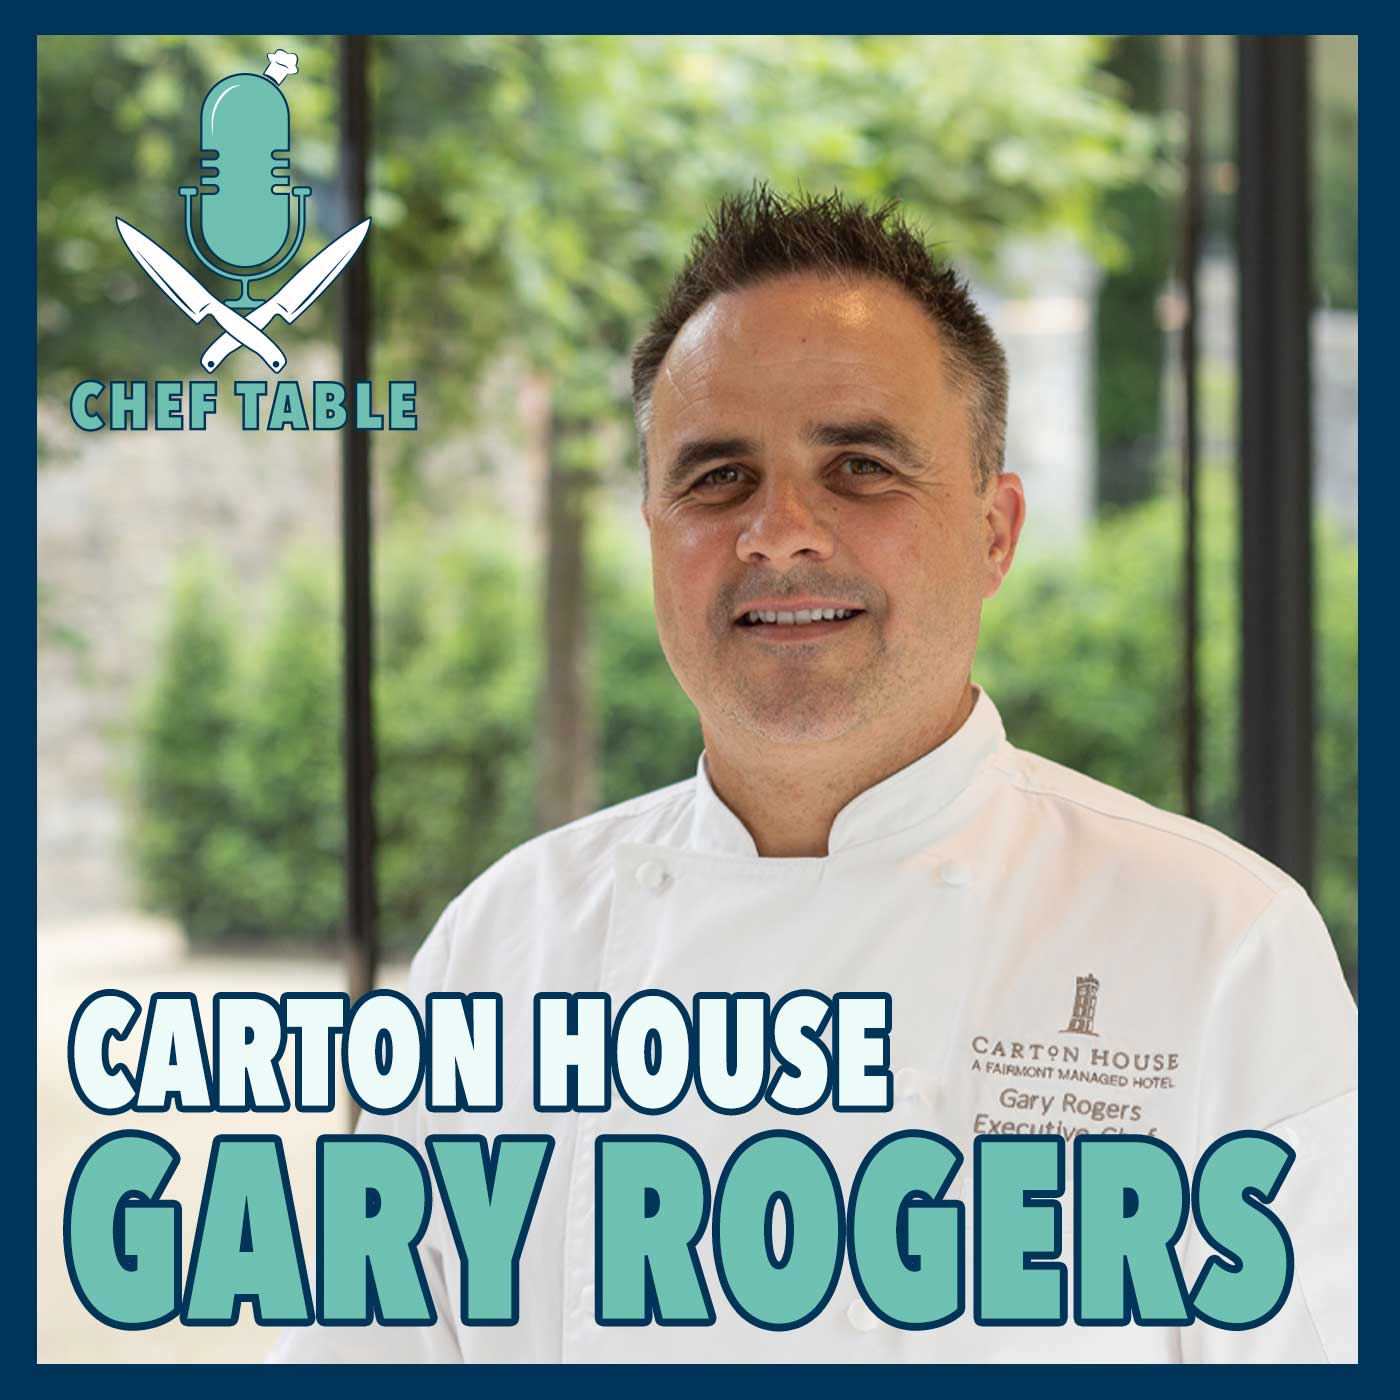 Team Work in Carton House kitchens with Executive Chef Gary Rogers